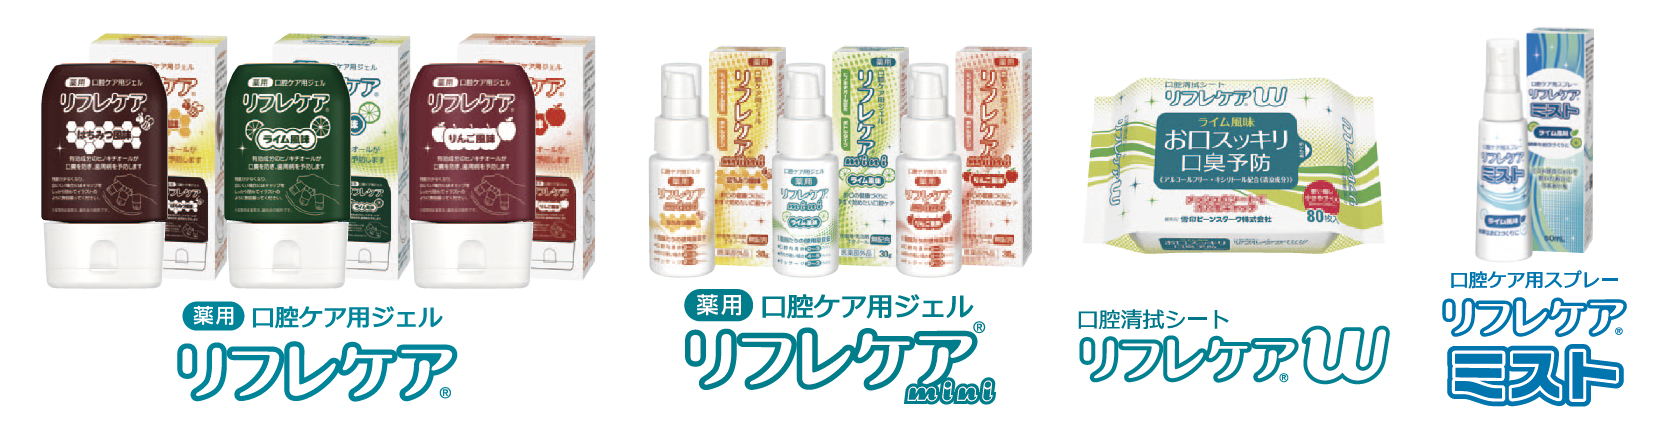 53%OFF!】 リフレケアミスト <br>ライム0風味 50ml<br> admissionoffice.ge